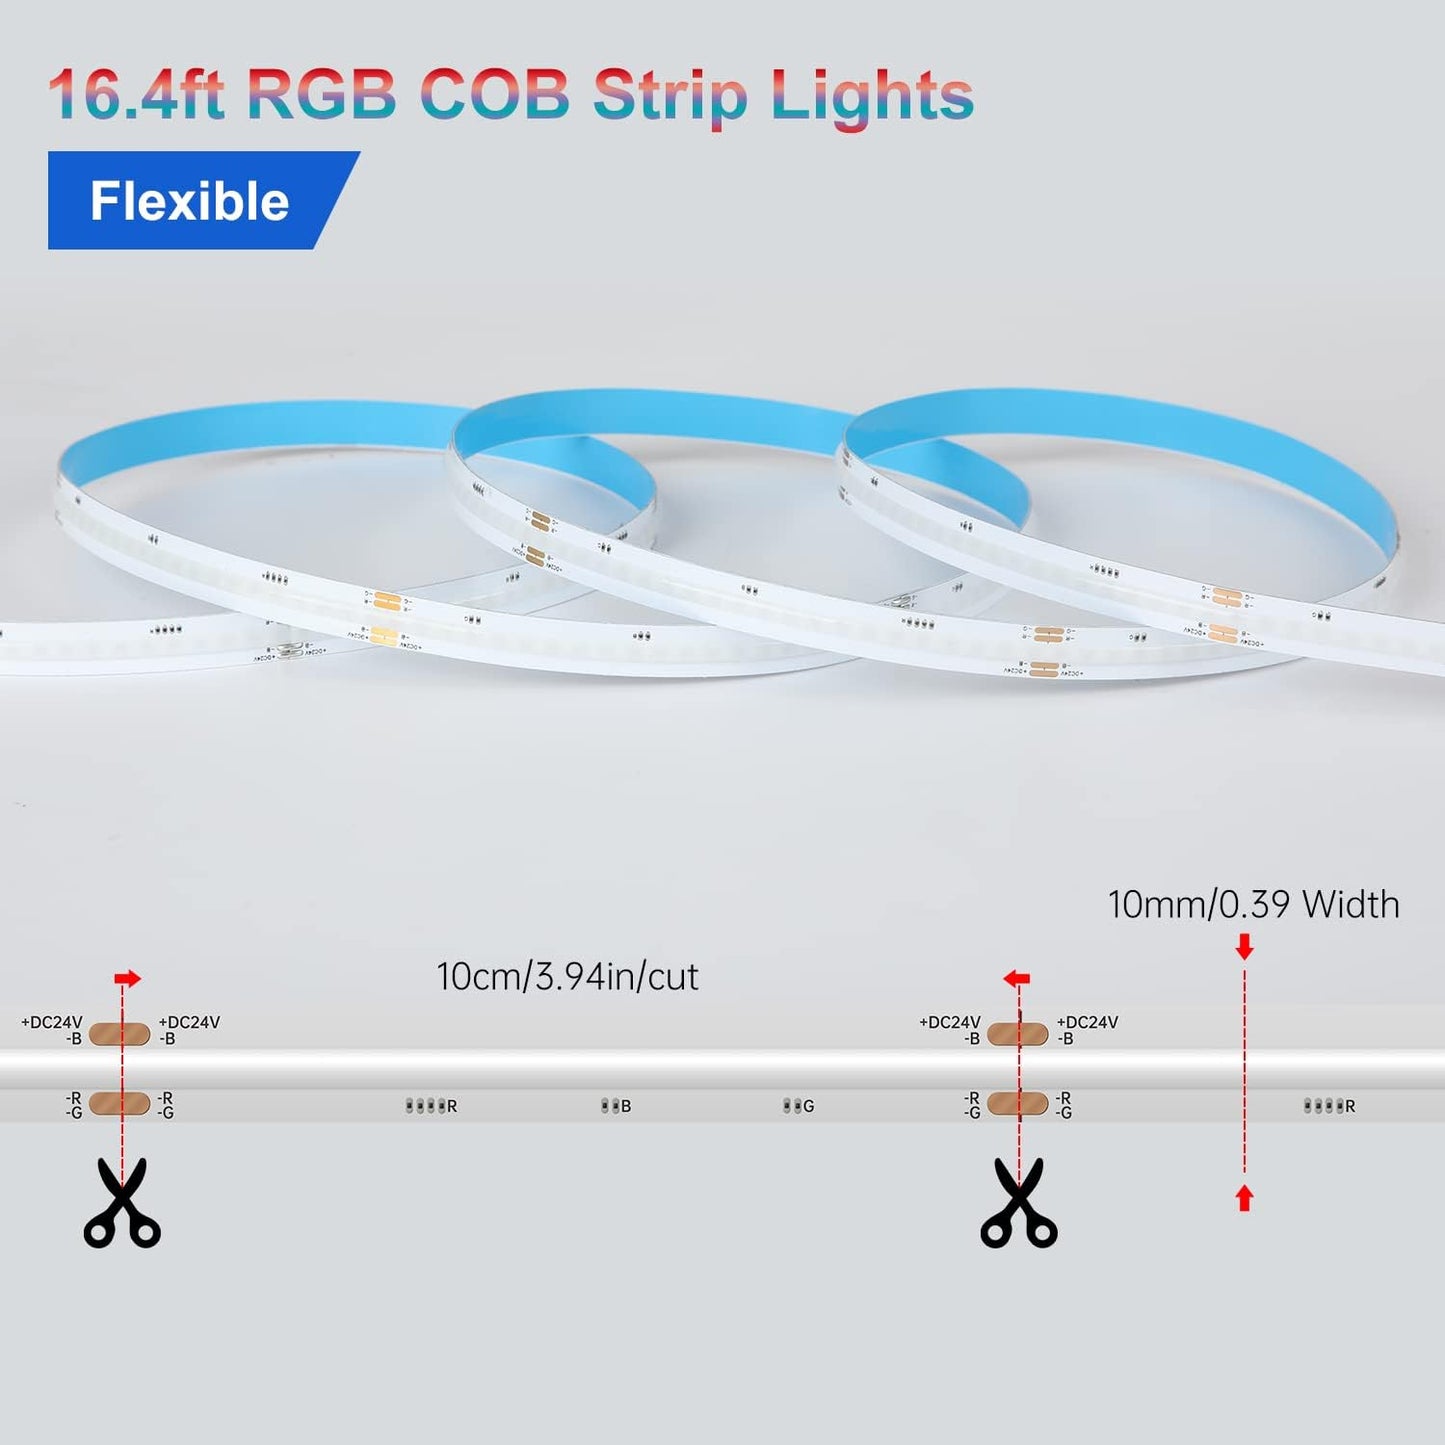 24V Dimmable RGB COB LED Strip Light Kit, 16.4FT, 12W/M, Flexible & Cuttable Lighting for Bedroom, Kitchen, DIY Home Decoration